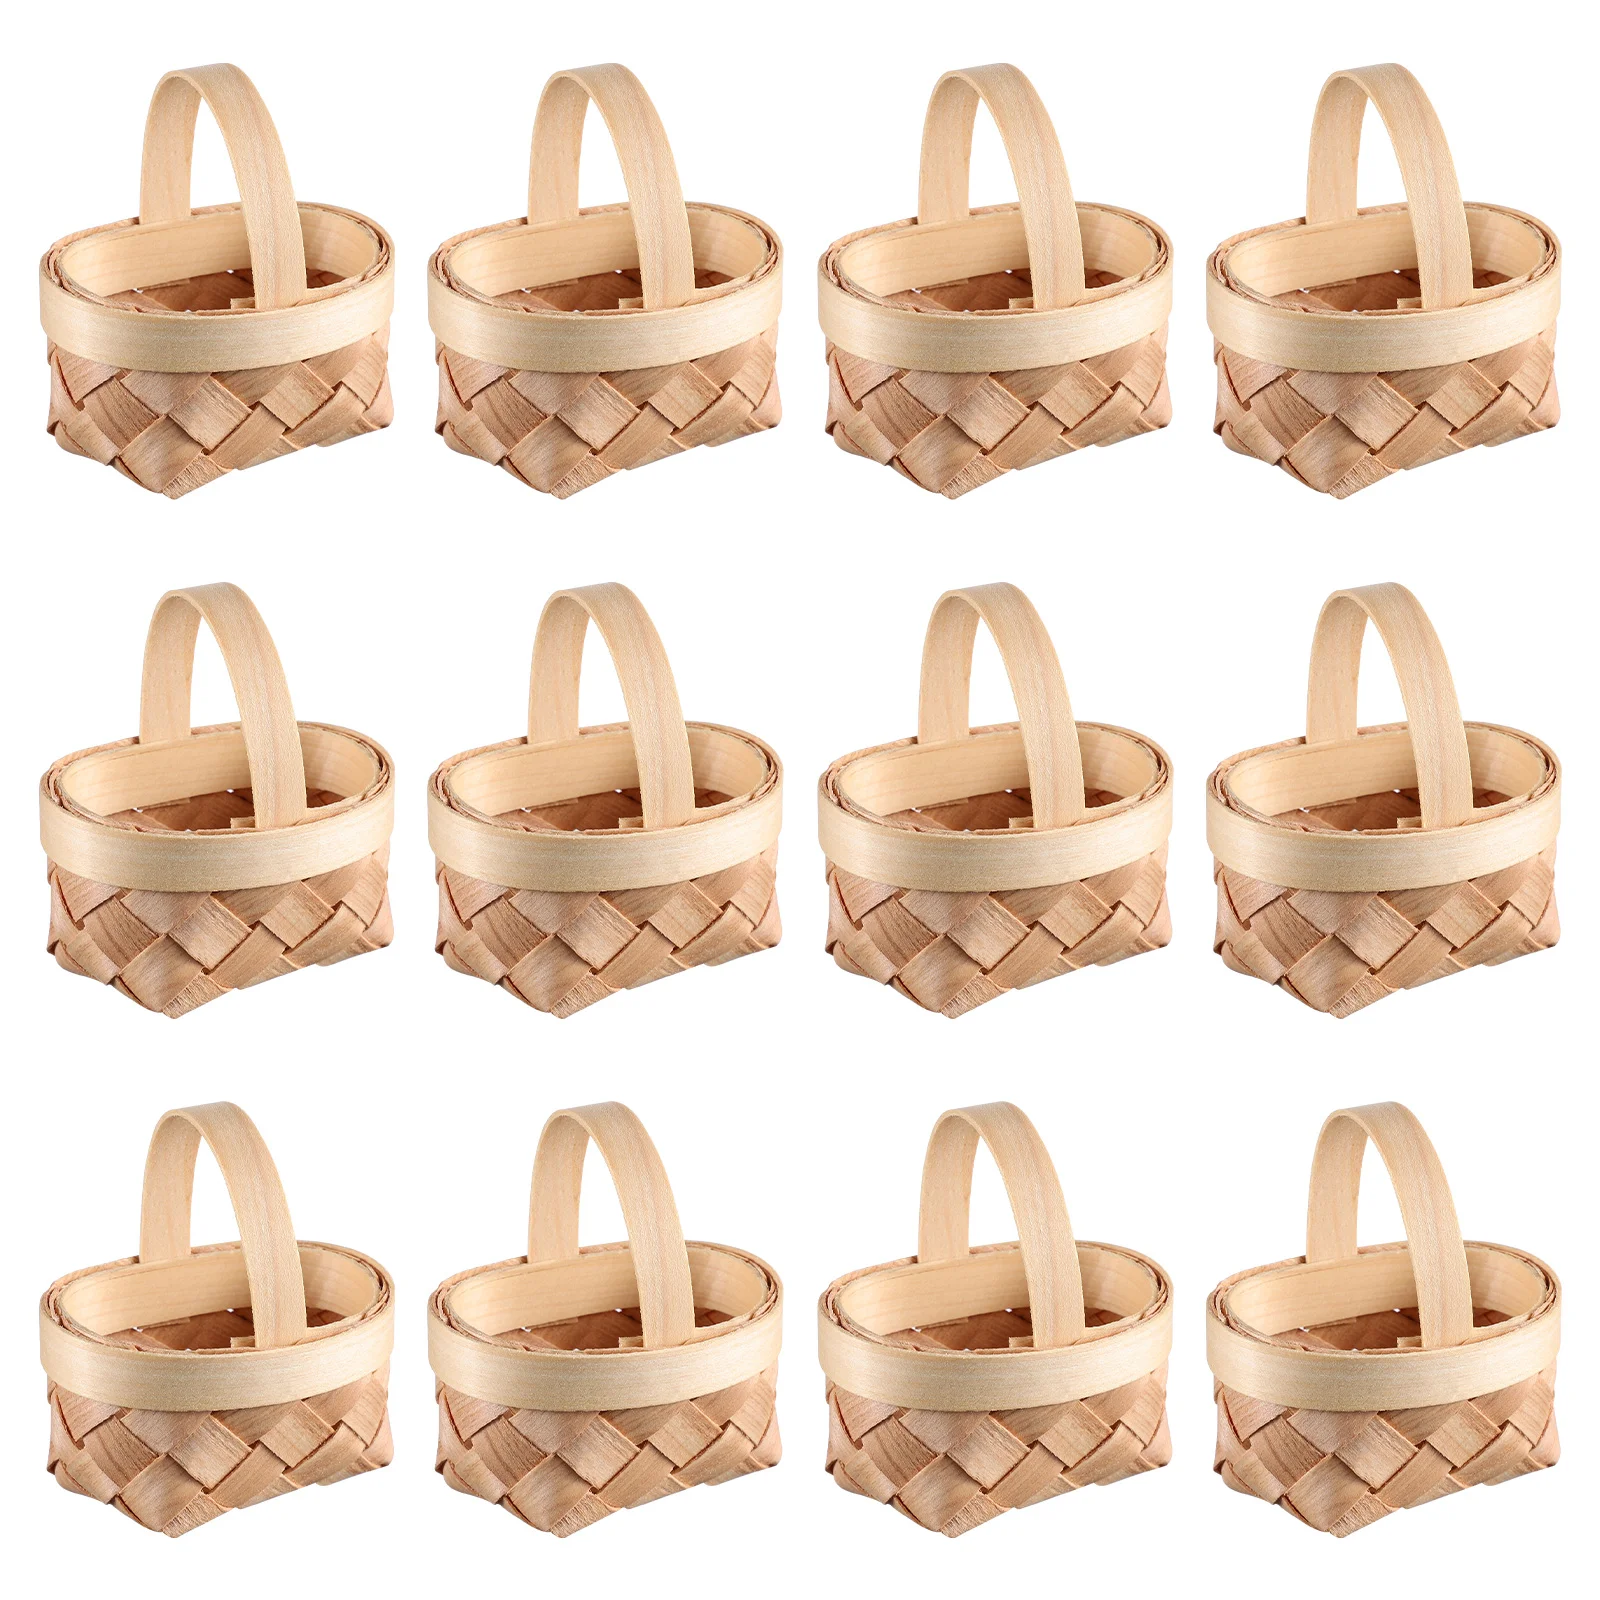 

Baskets Mini Basketwoven Wicker Miniatureparty Wooden Favorspicnic Crafts Woodgift Tiny Handle Candy Chip Hanging Easter Storage